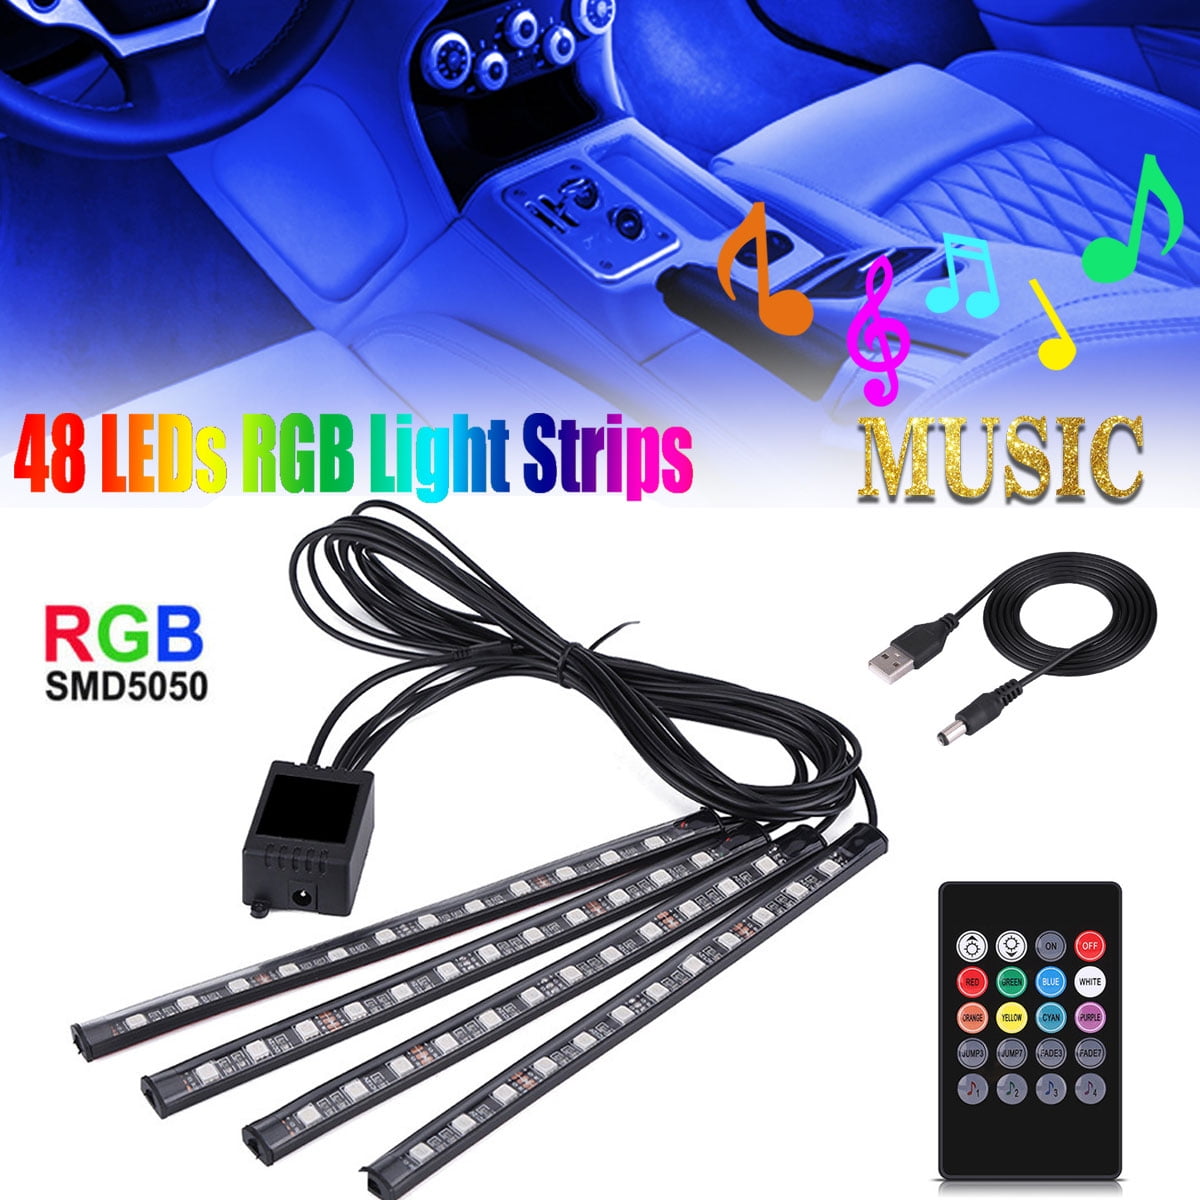 EECOO Waterproof 4x12 LED Neon Lamp Underdash Decorative Multicolor RGB Music Atmosphere Strip Light LED Lighting Kit with Sound Active Function Car Interior Lights 8 colors,48LEDs Wireless Remote Control and Smart USB Port